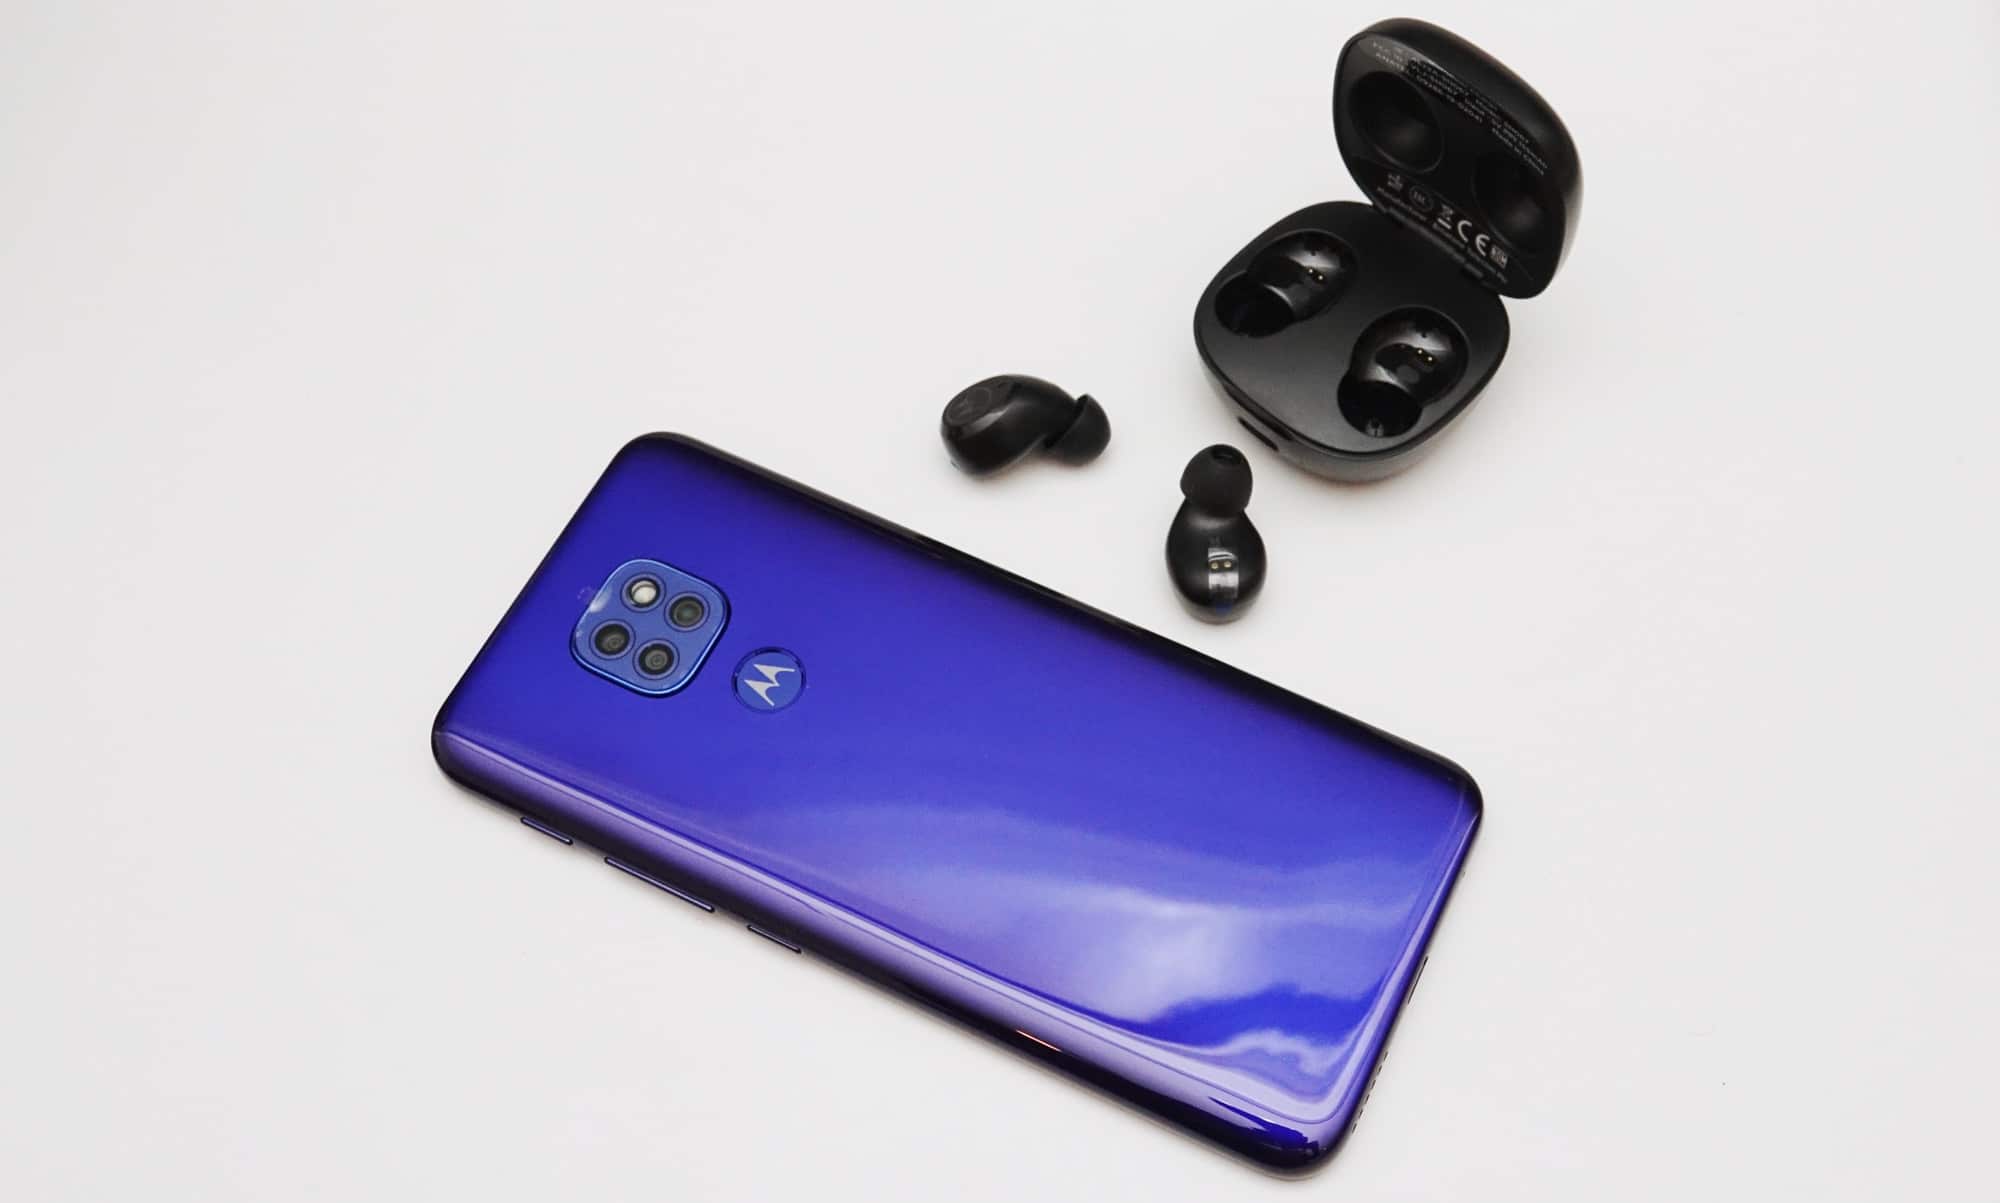 Moto G9 Play with wireless earbuds